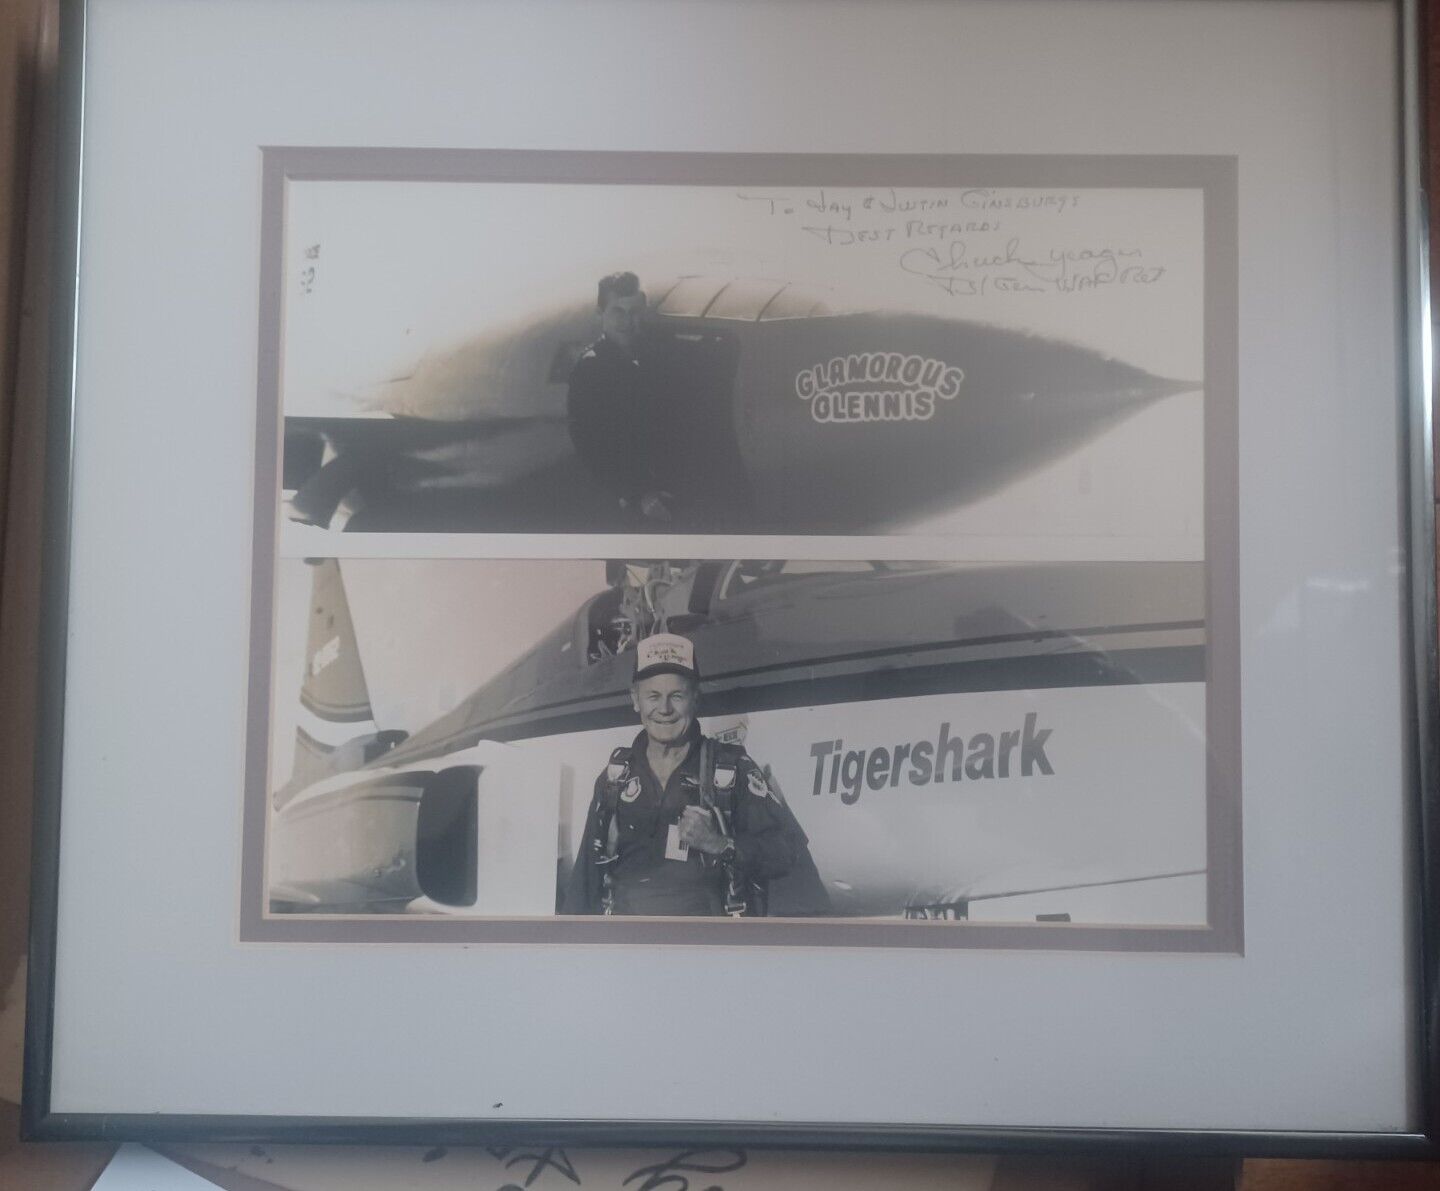 WW2 Flying Ace, Brig Gen. Chuck Yeager Autographed B&W Photo 8x10 Framed